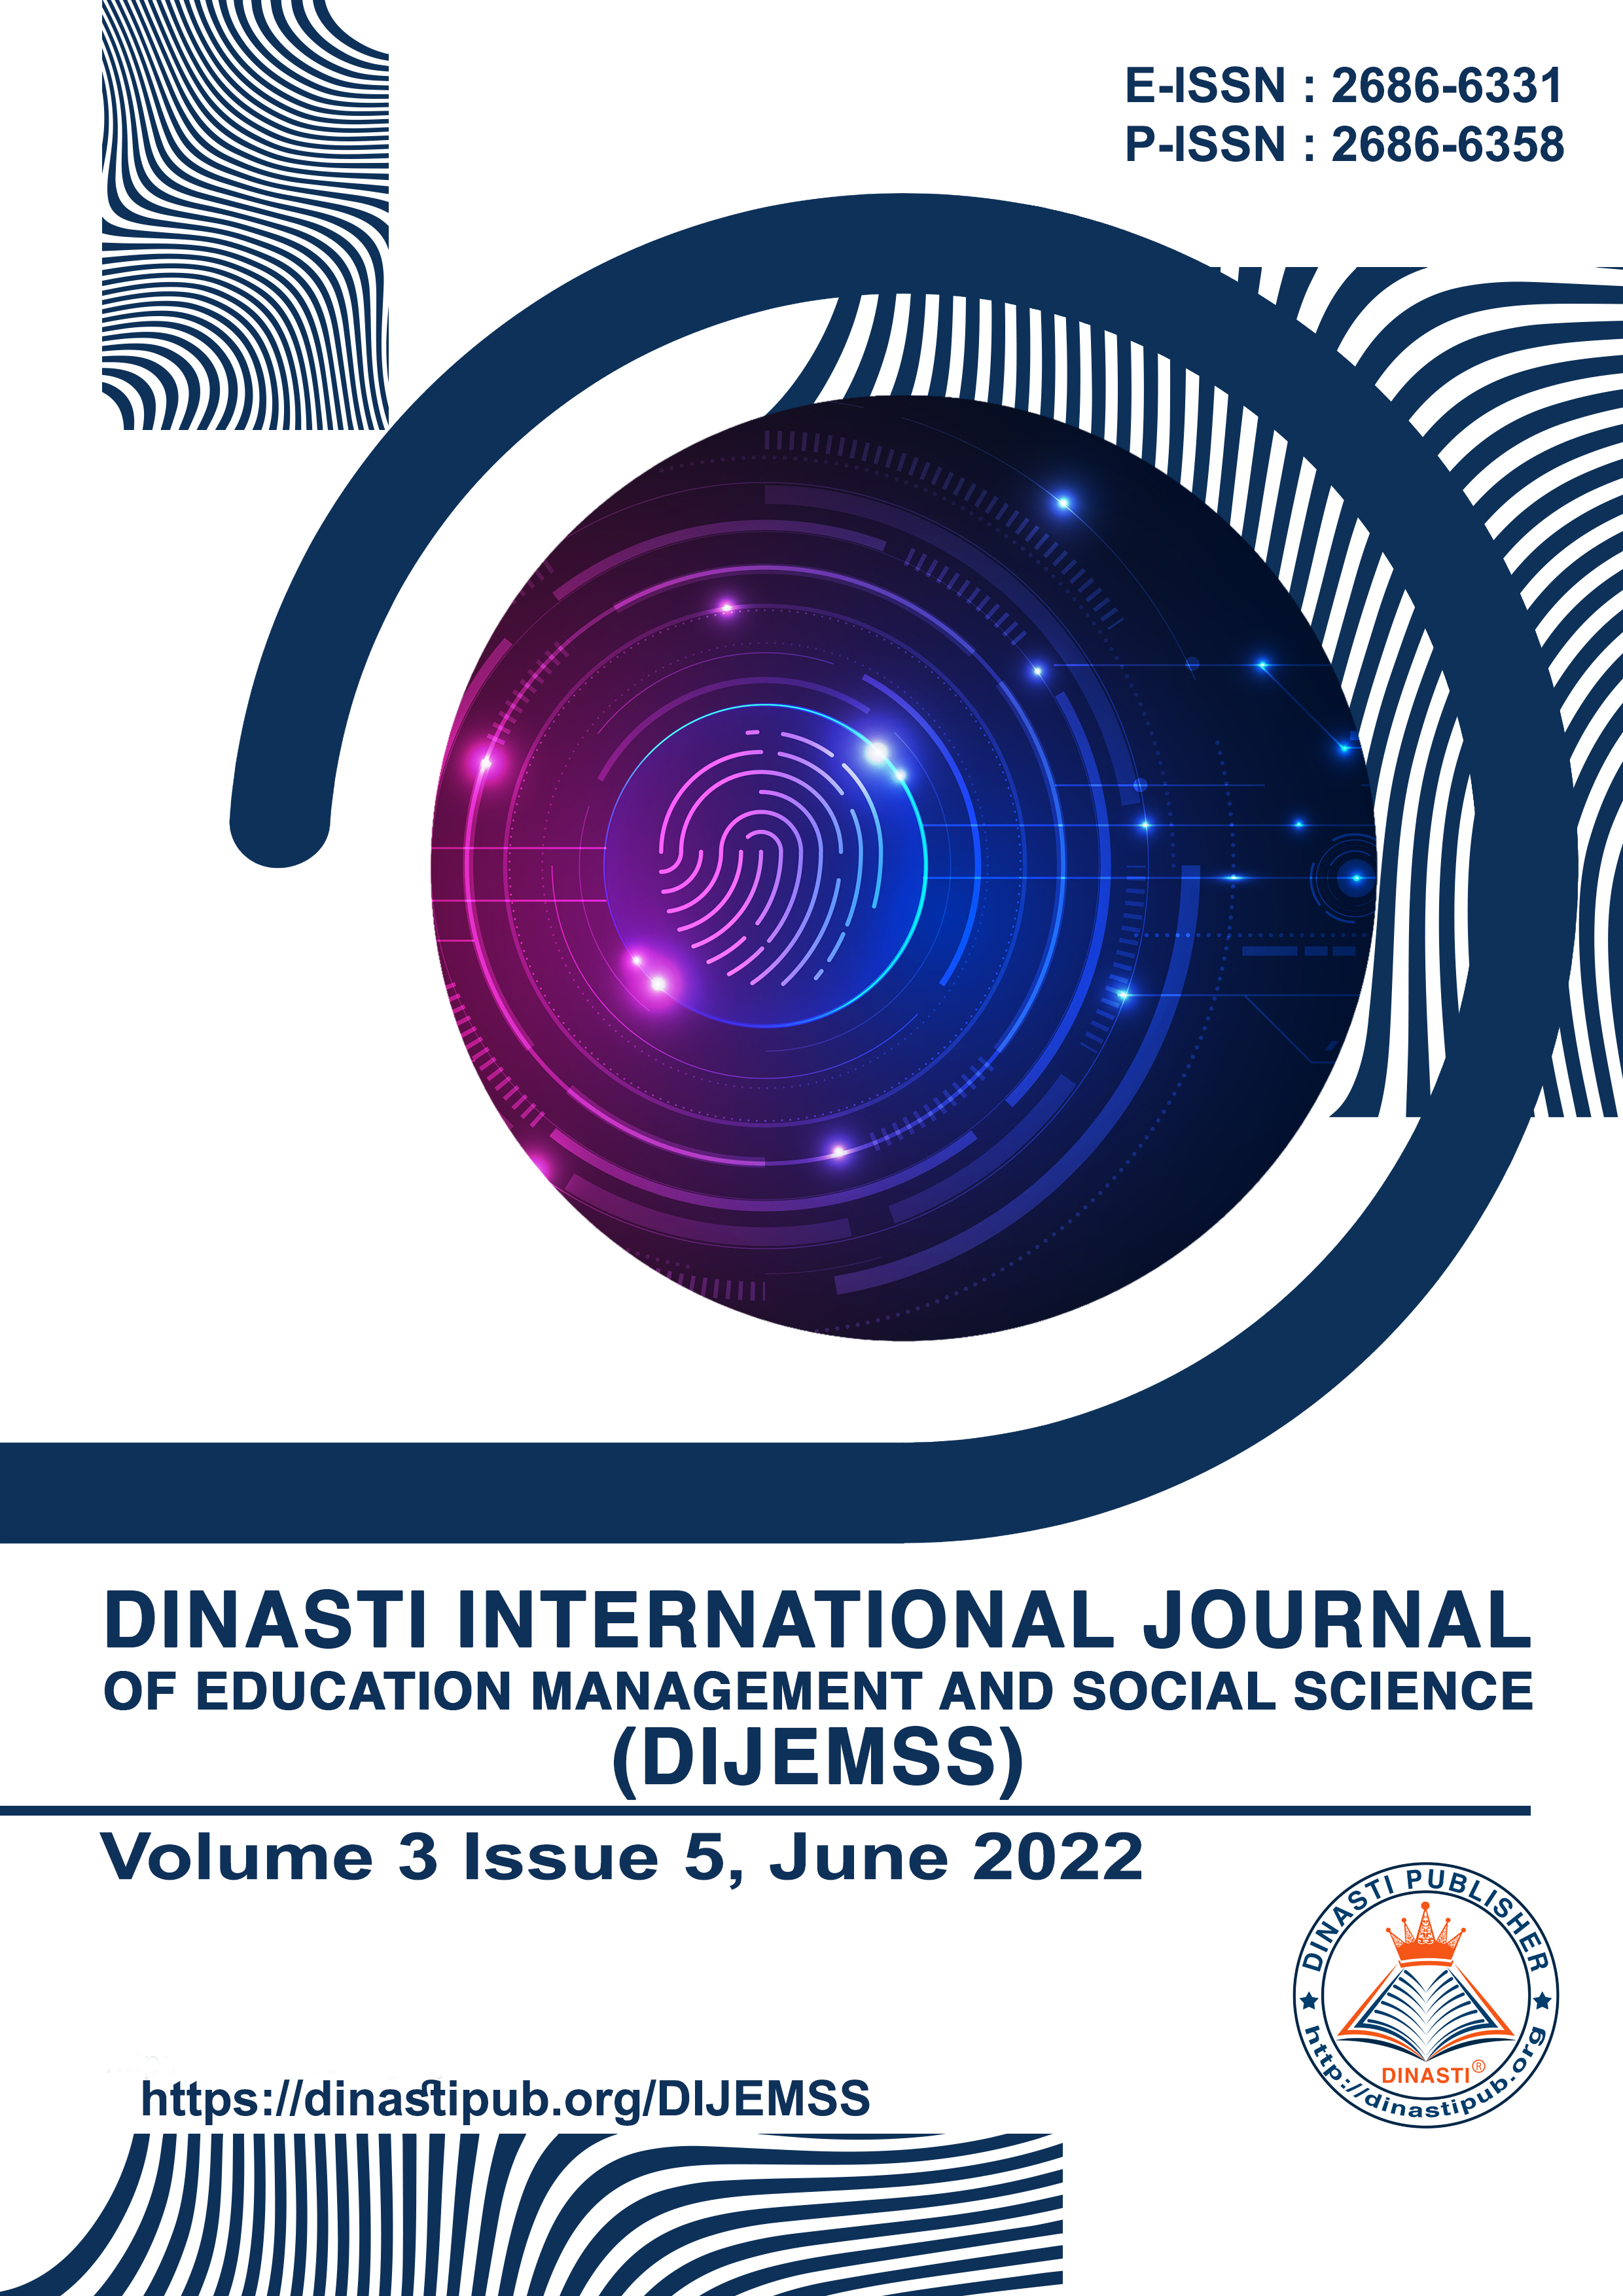 					View Vol. 3 No. 5 (2022): Dinasti International Journal of Education Management and Social Science (June - july 2022)
				